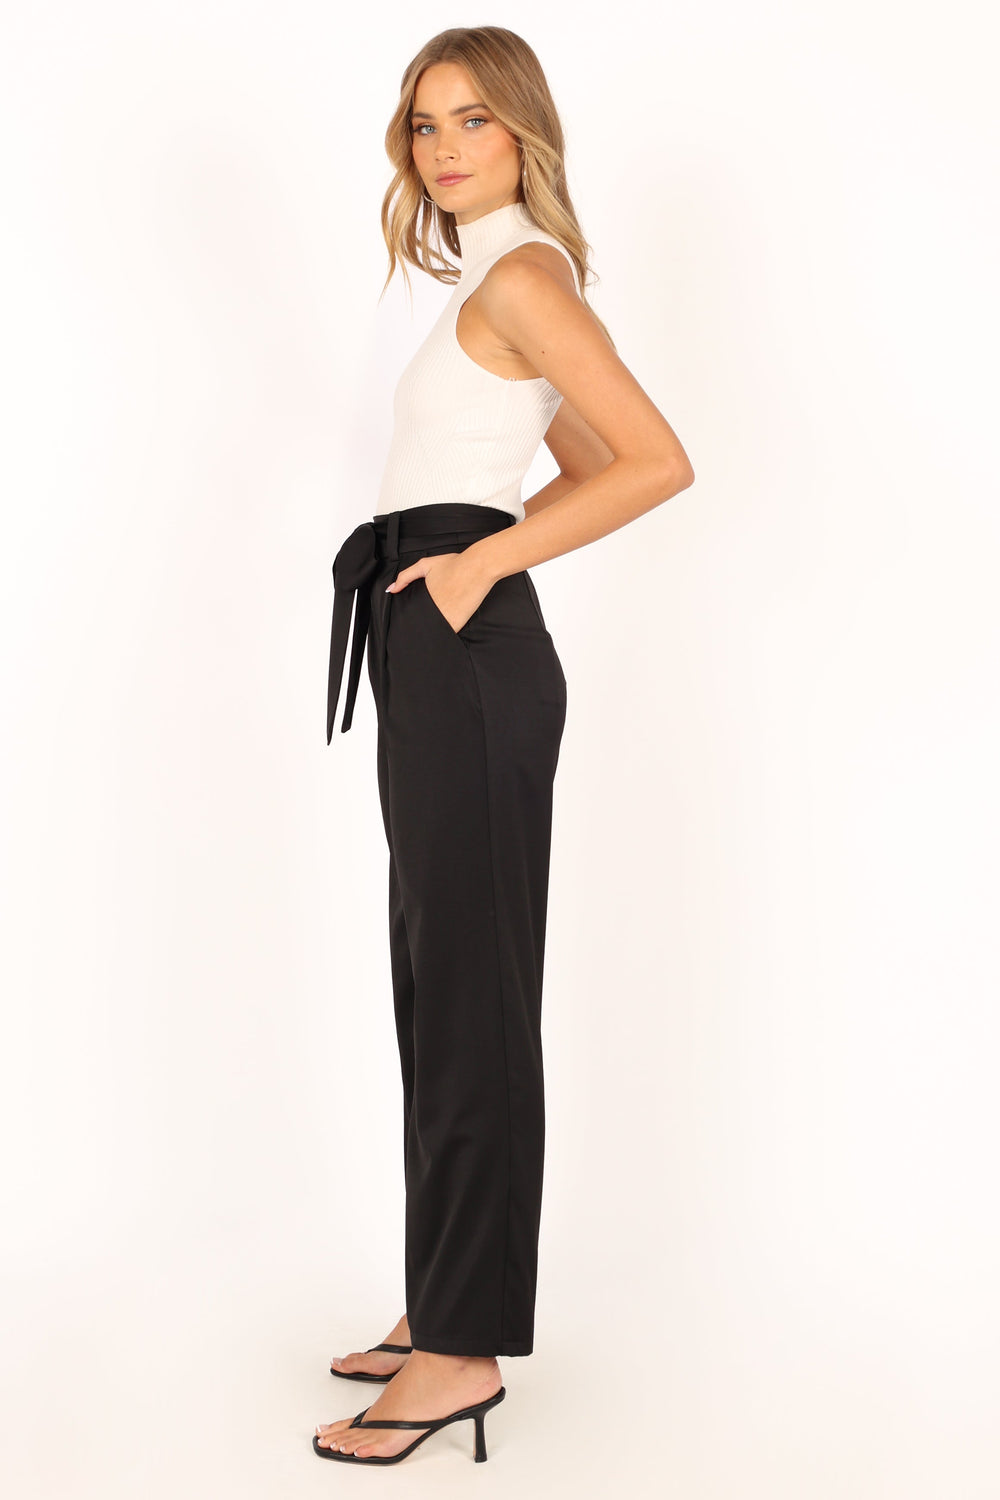 Buy Nelly Side Tie Pant - Black | Nelly.com